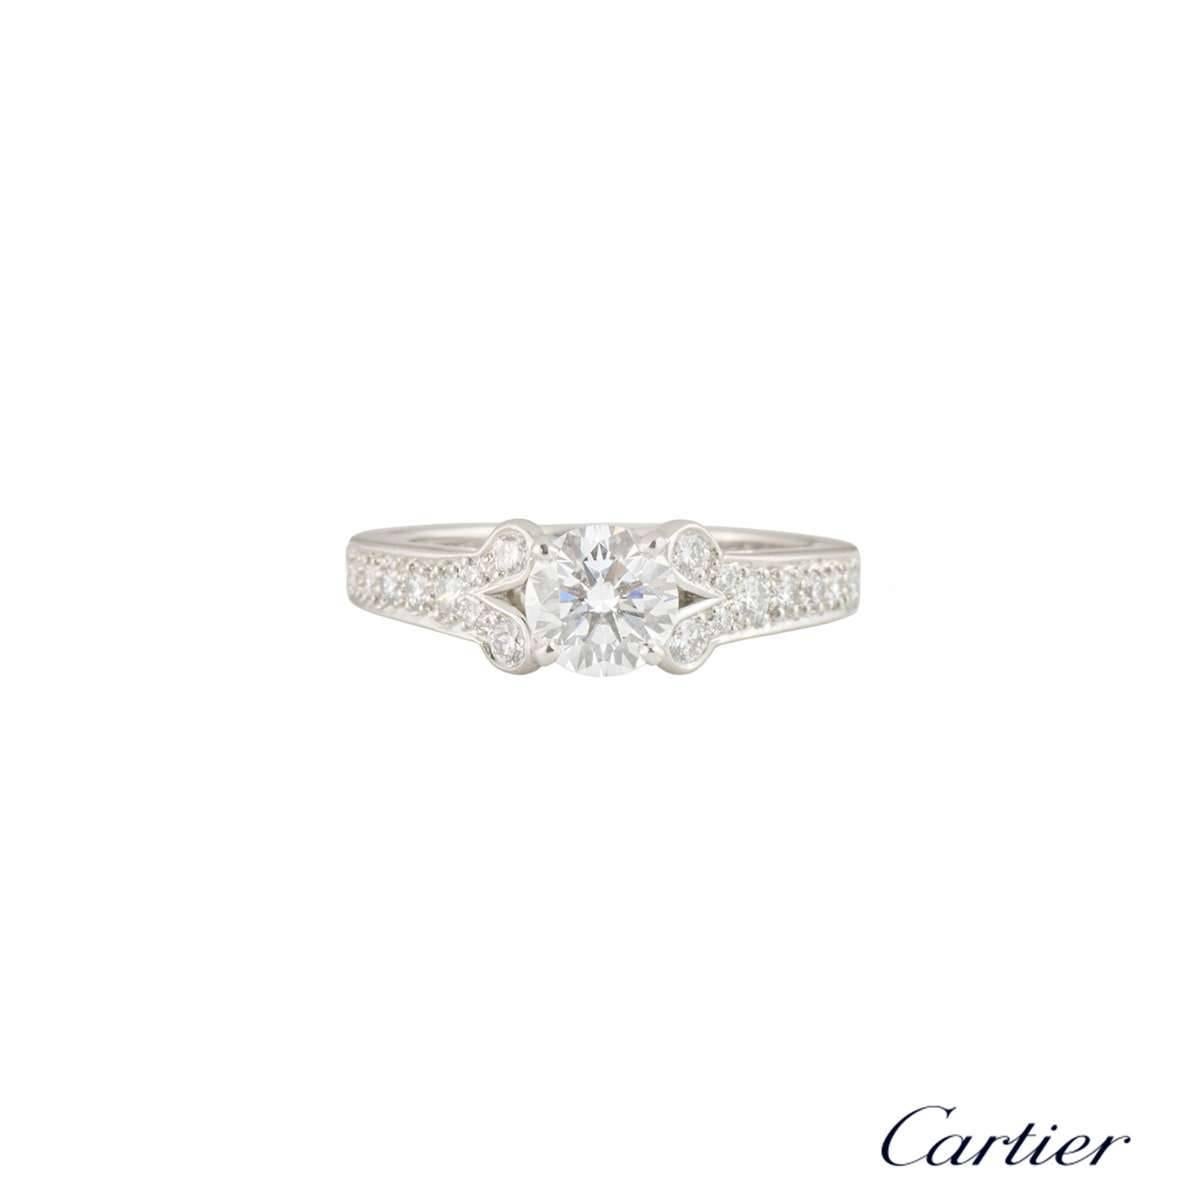 A stunning diamond engagement ring in platinum from the Ballerine collection by Cartier. The central 0.71ct round brilliant cut diamond is F colour and VS1 in clarity. The ring has diamond set rounded shoulders, set with 22 round brilliant cut